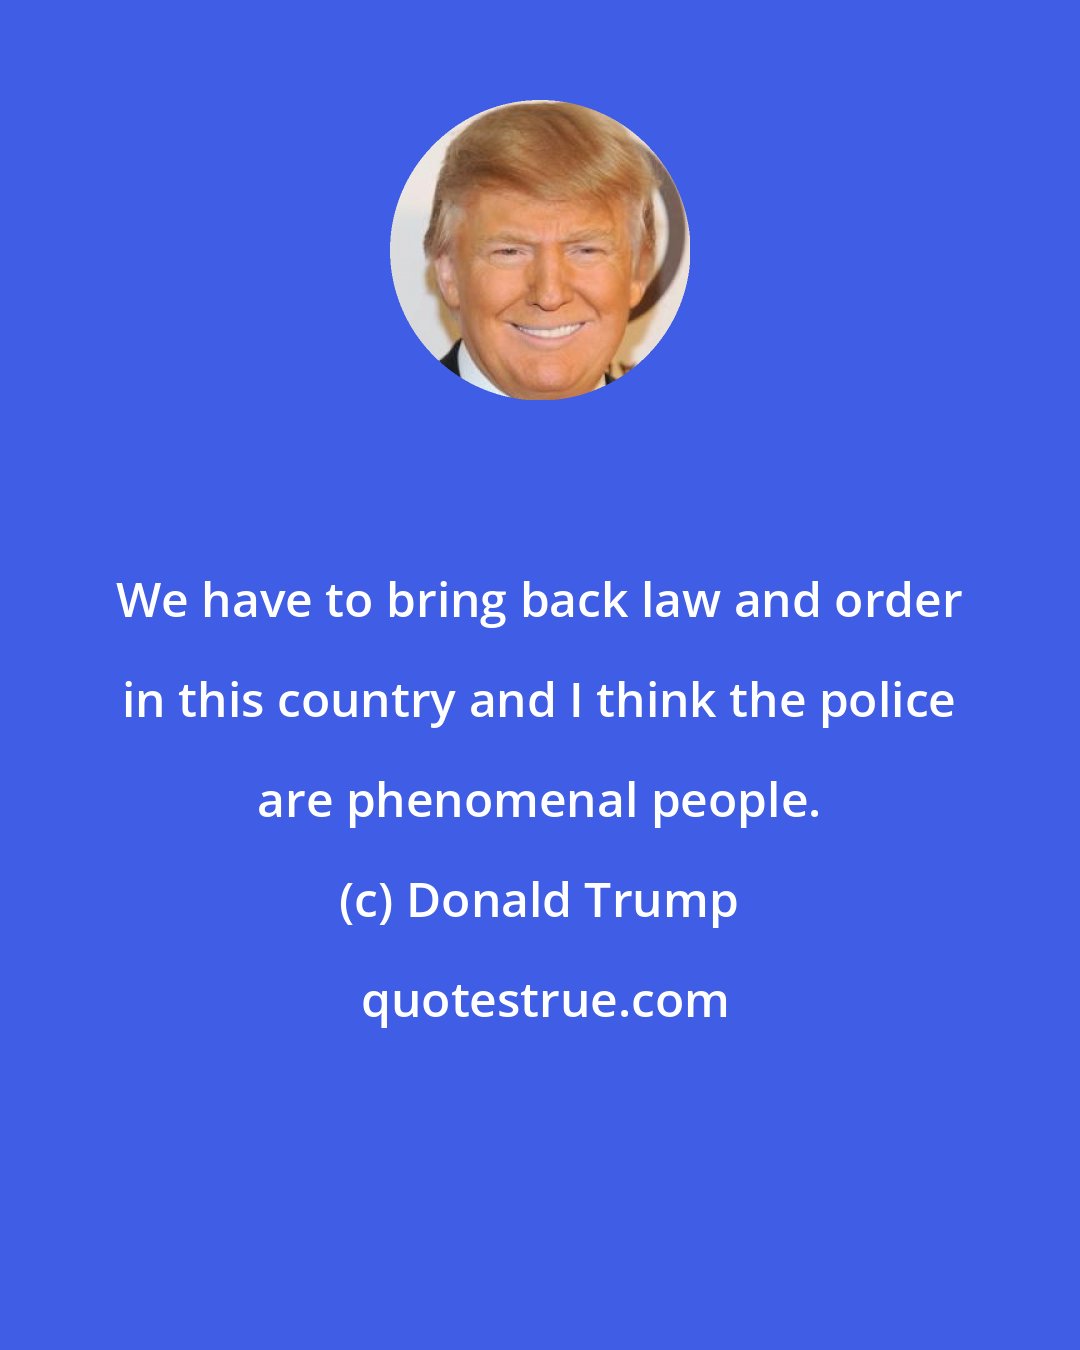 Donald Trump: We have to bring back law and order in this country and I think the police are phenomenal people.